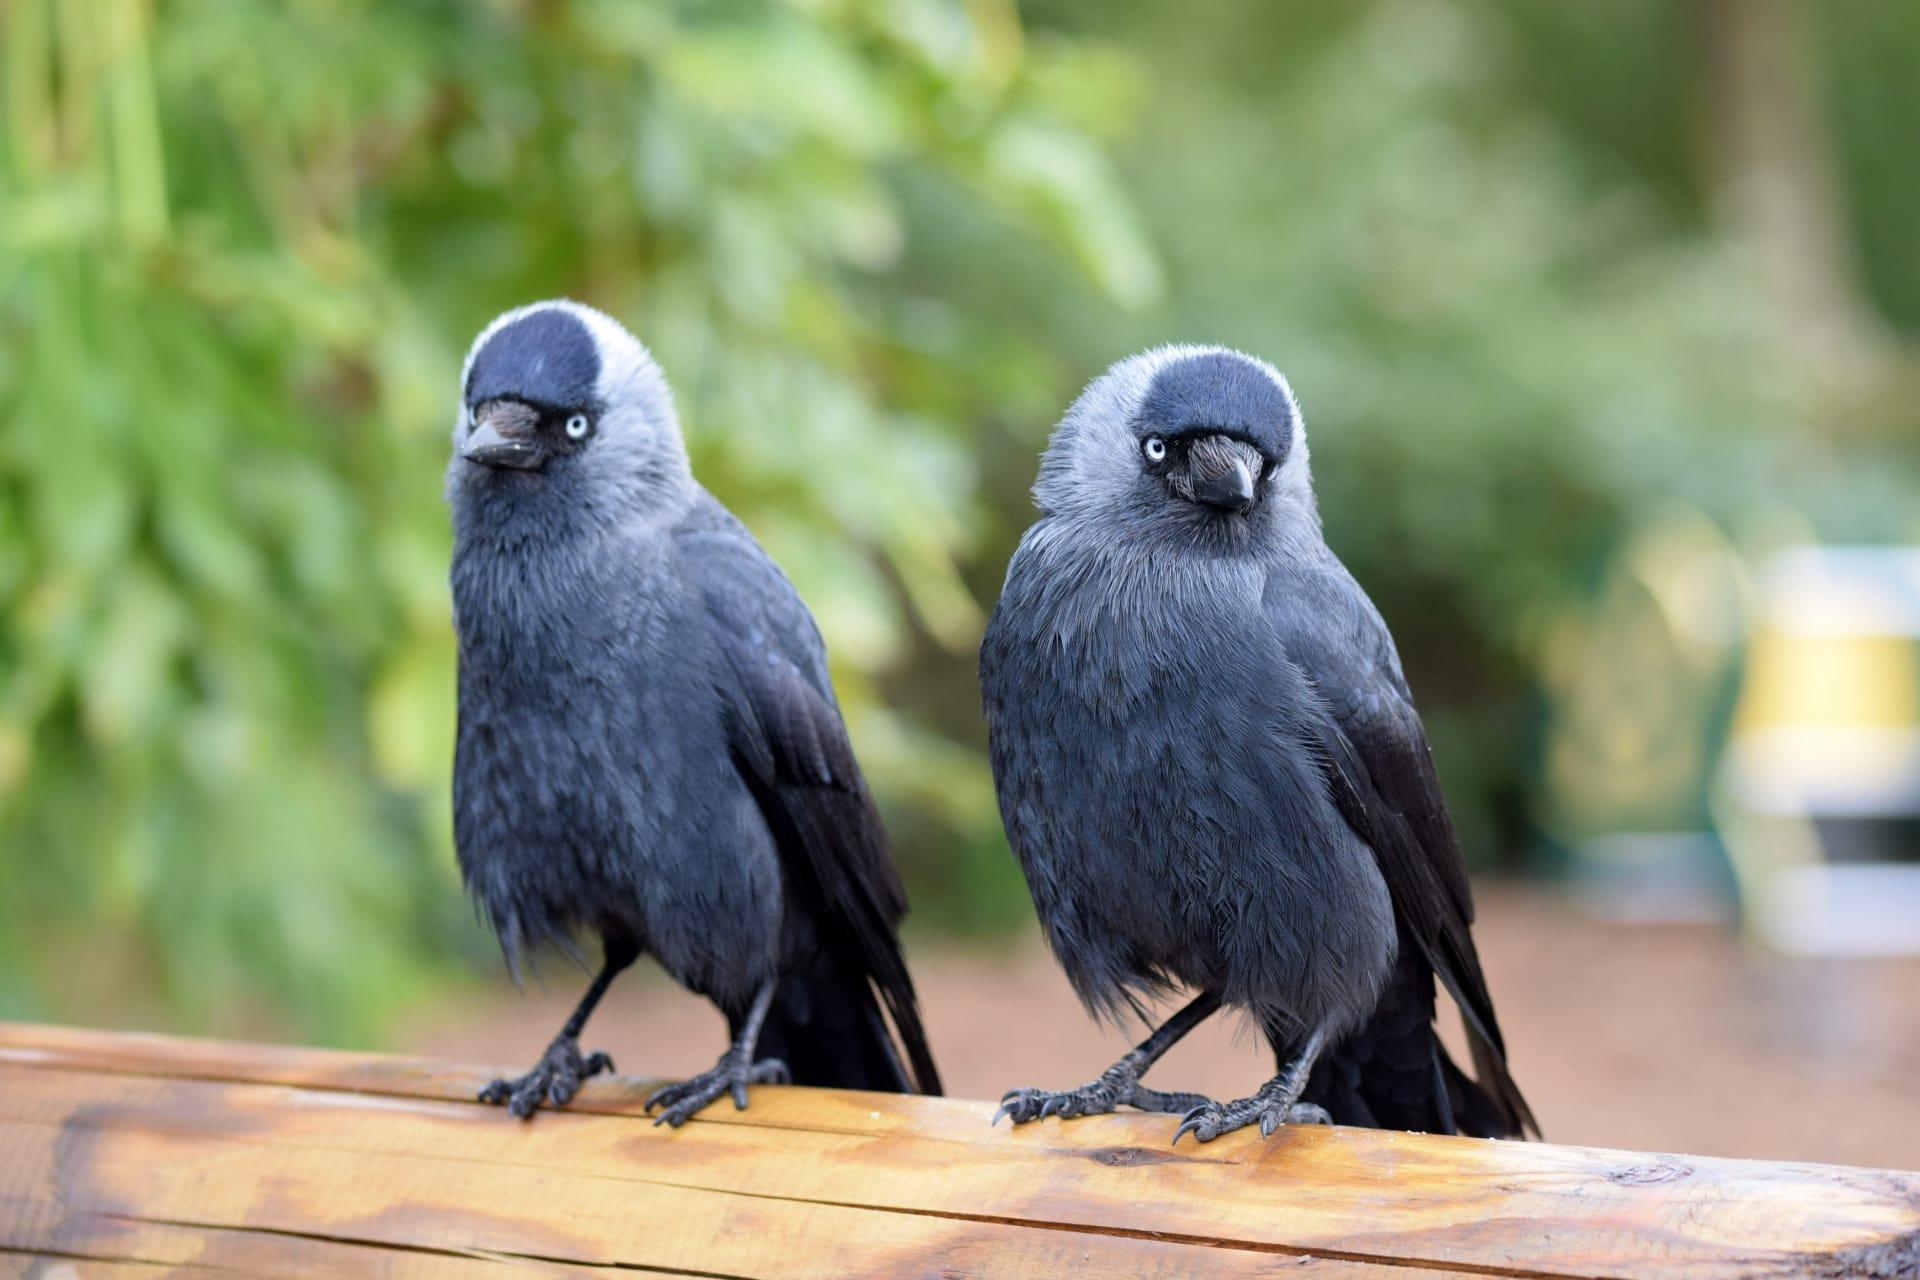 Jackdaw pictures